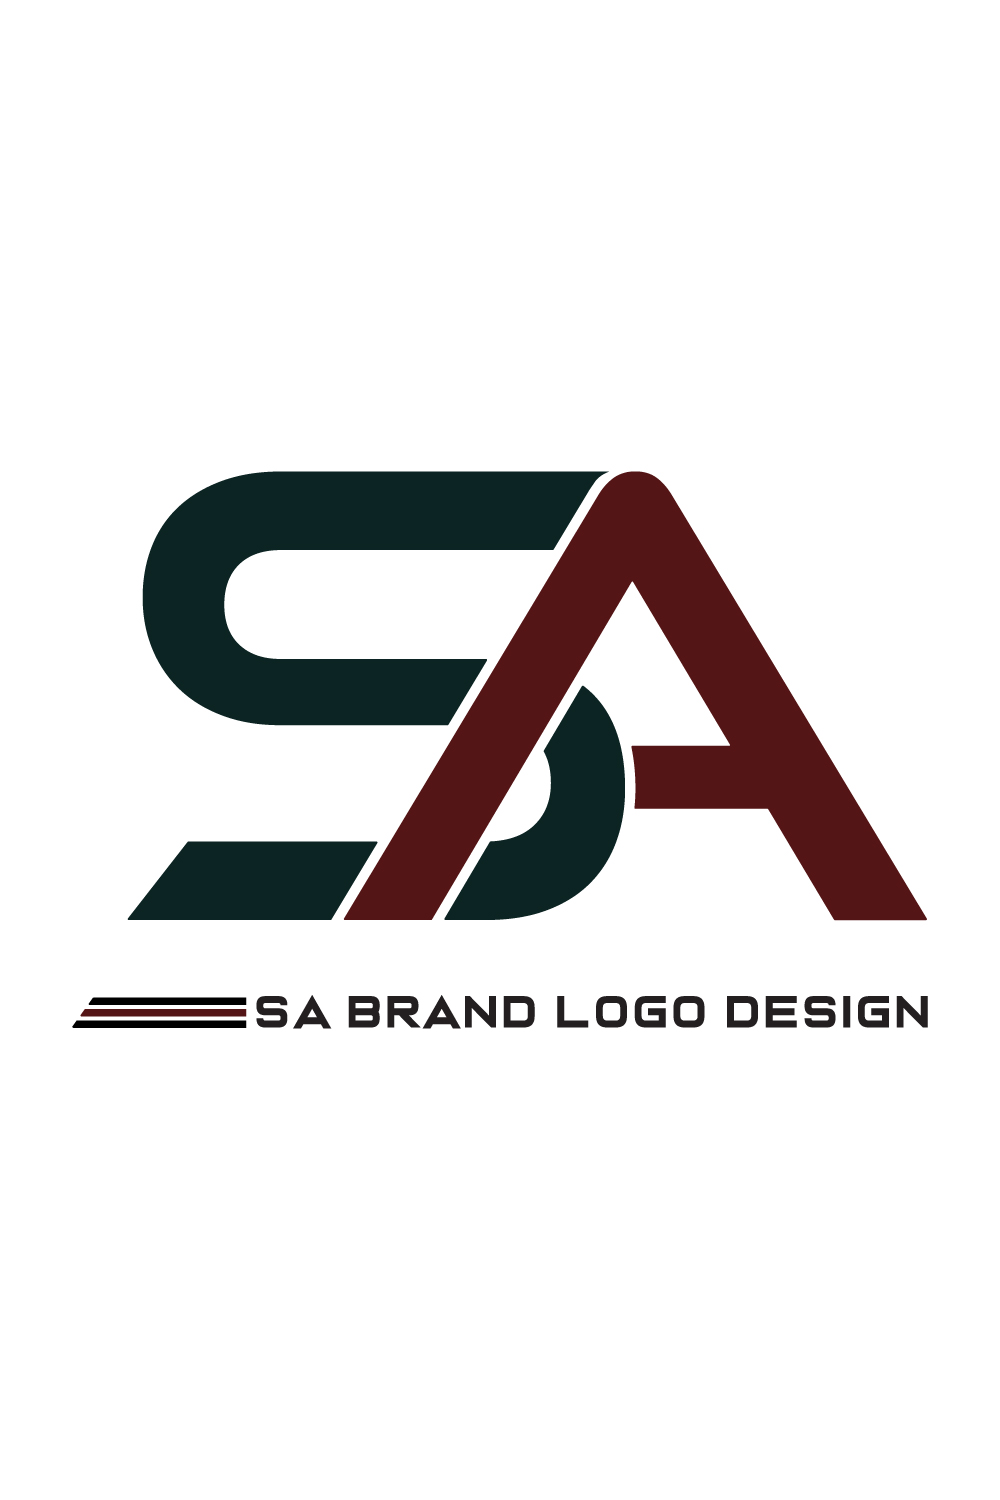 Initials SA letters logo design vector icon AS letters logo monogram best royalty SA logo design best icon SA logo design pinterest preview image.